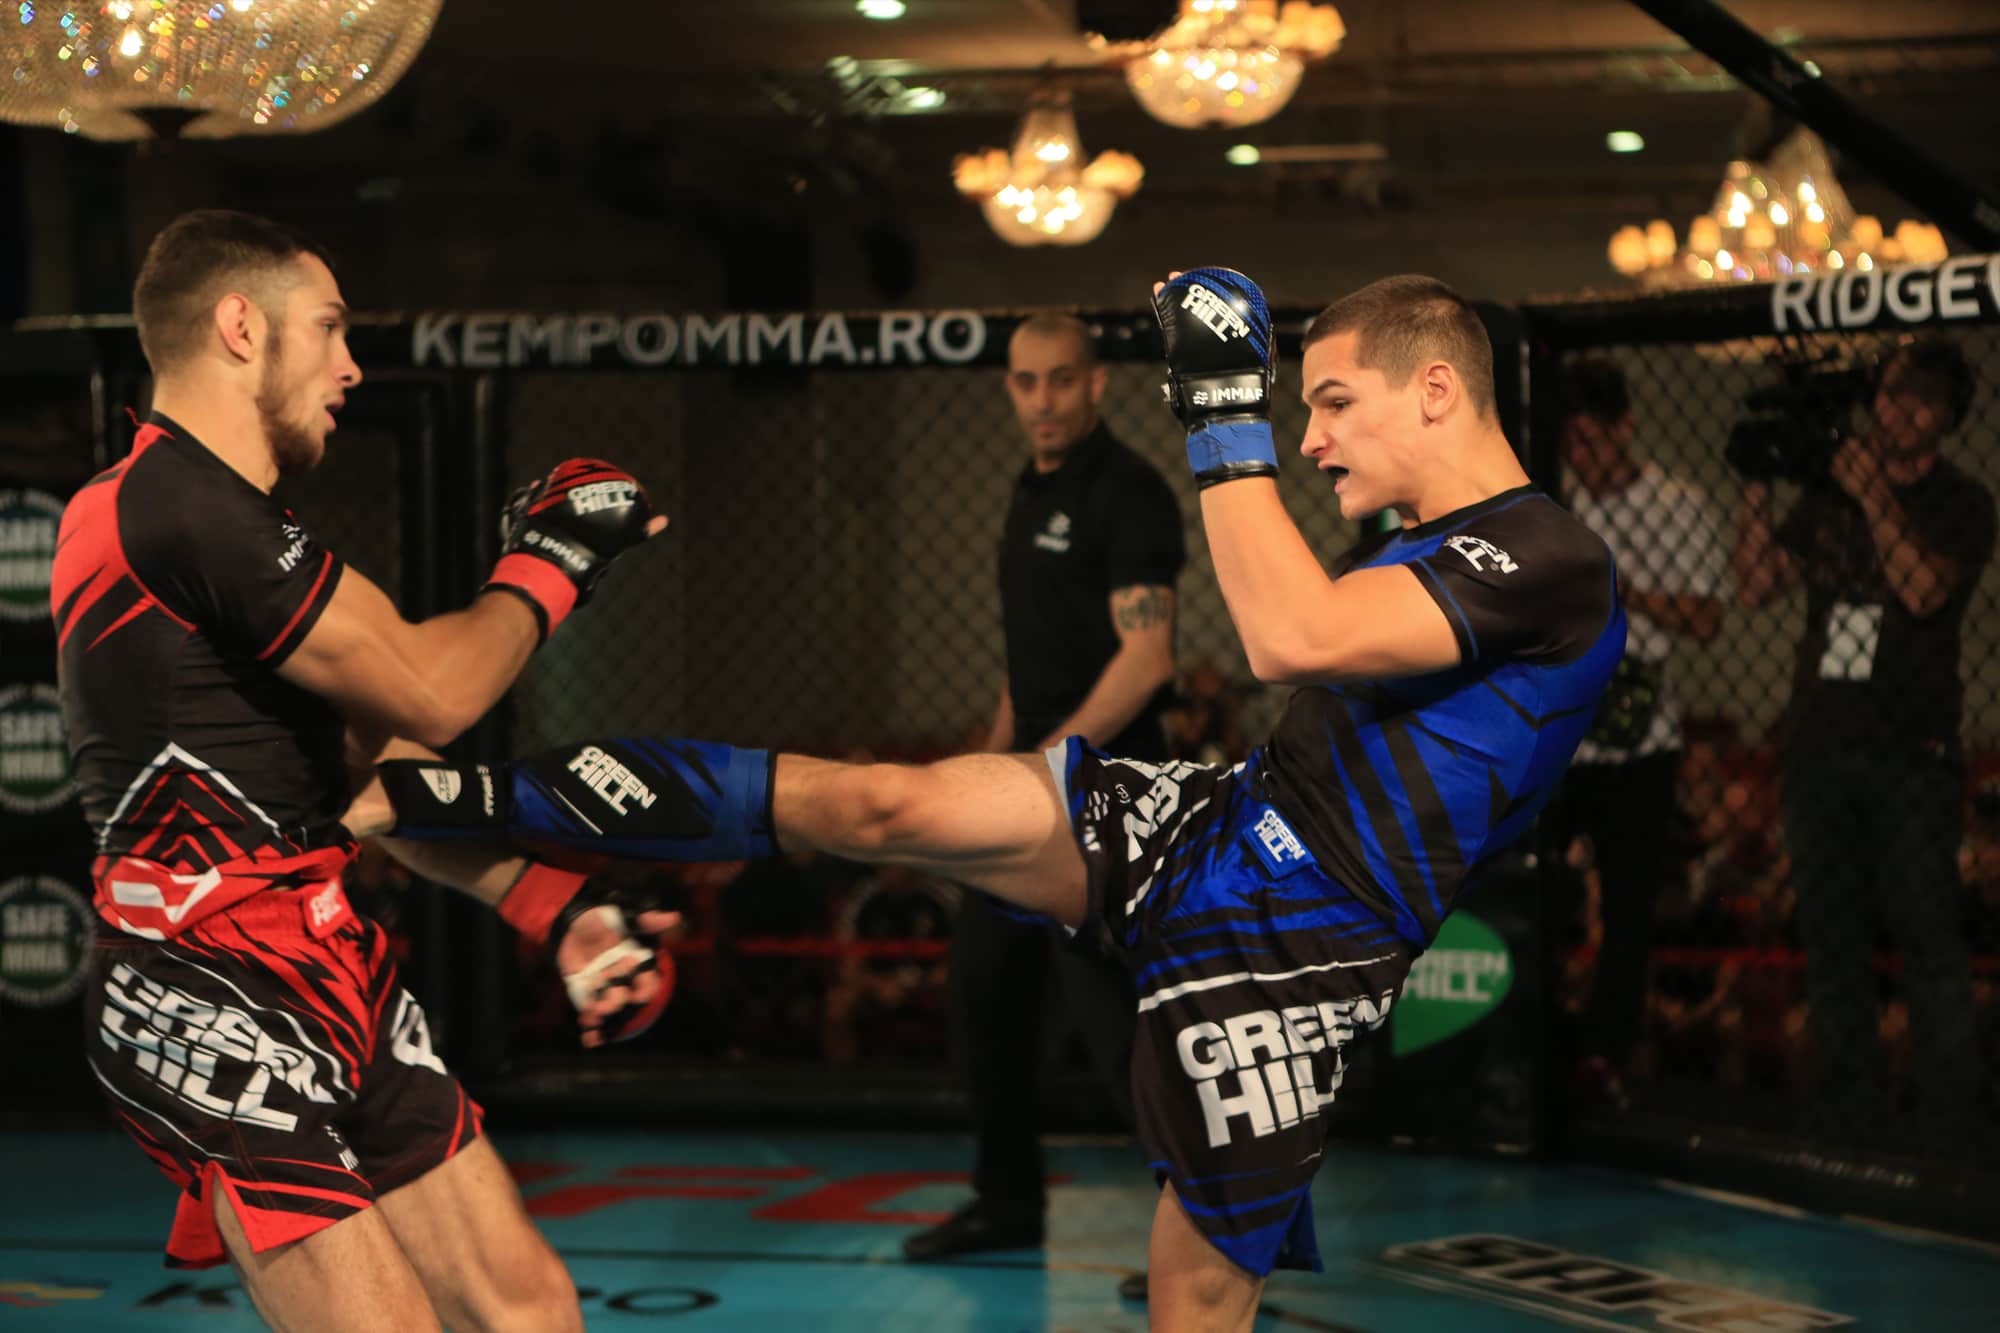 Austria excited to be back on the IMMAF stage with a “young and motivated team”